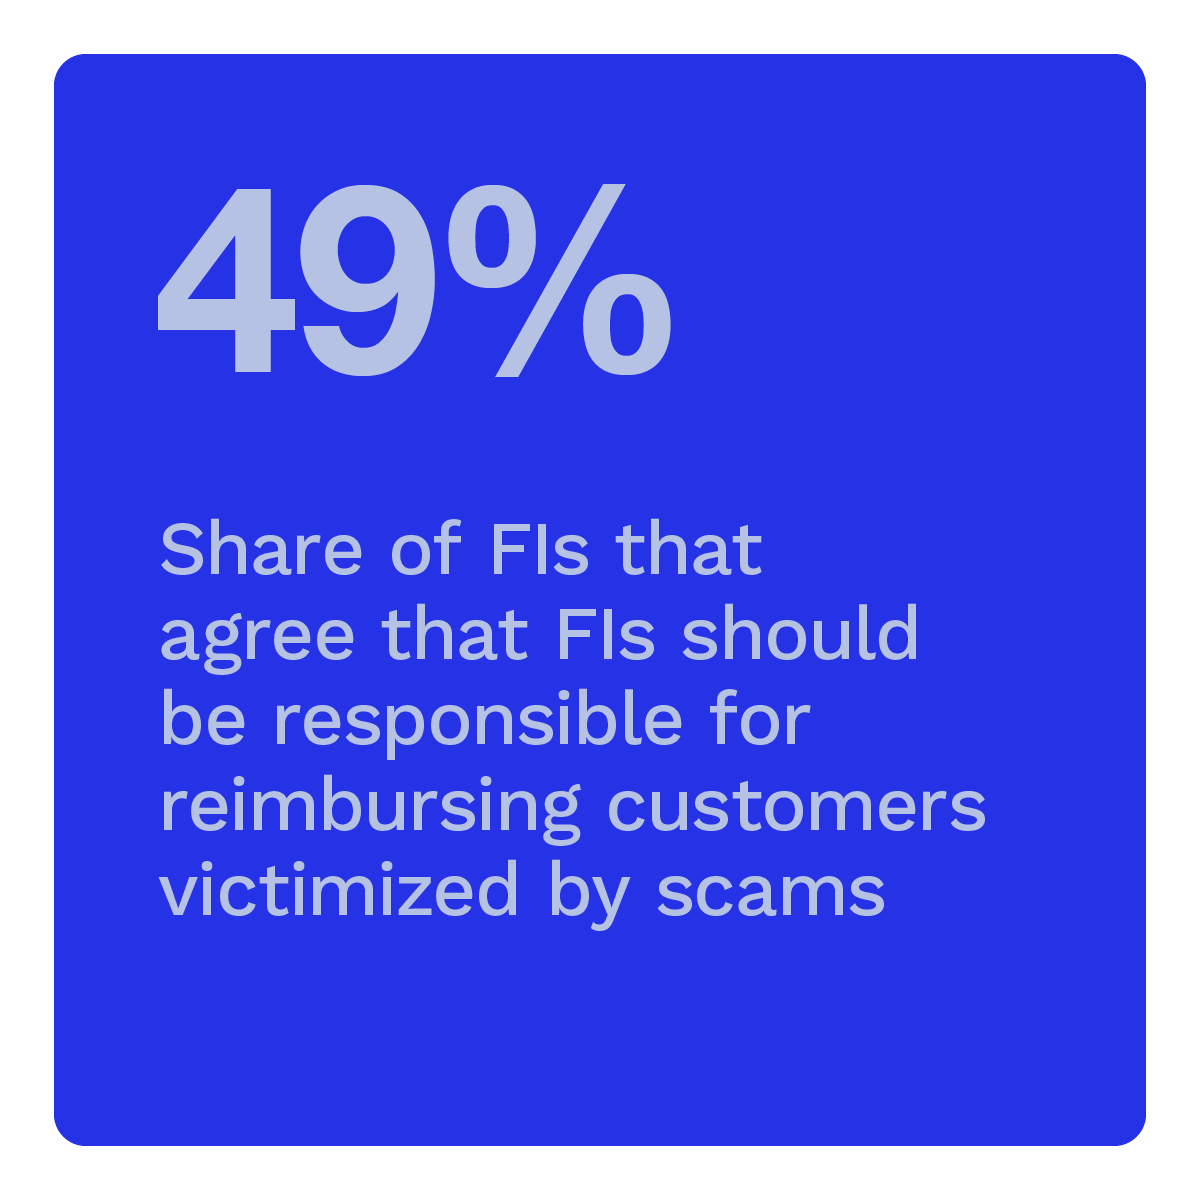 49%: Share of FIs that agree that FIs should be responsible for reimbursing customers victimized by scams